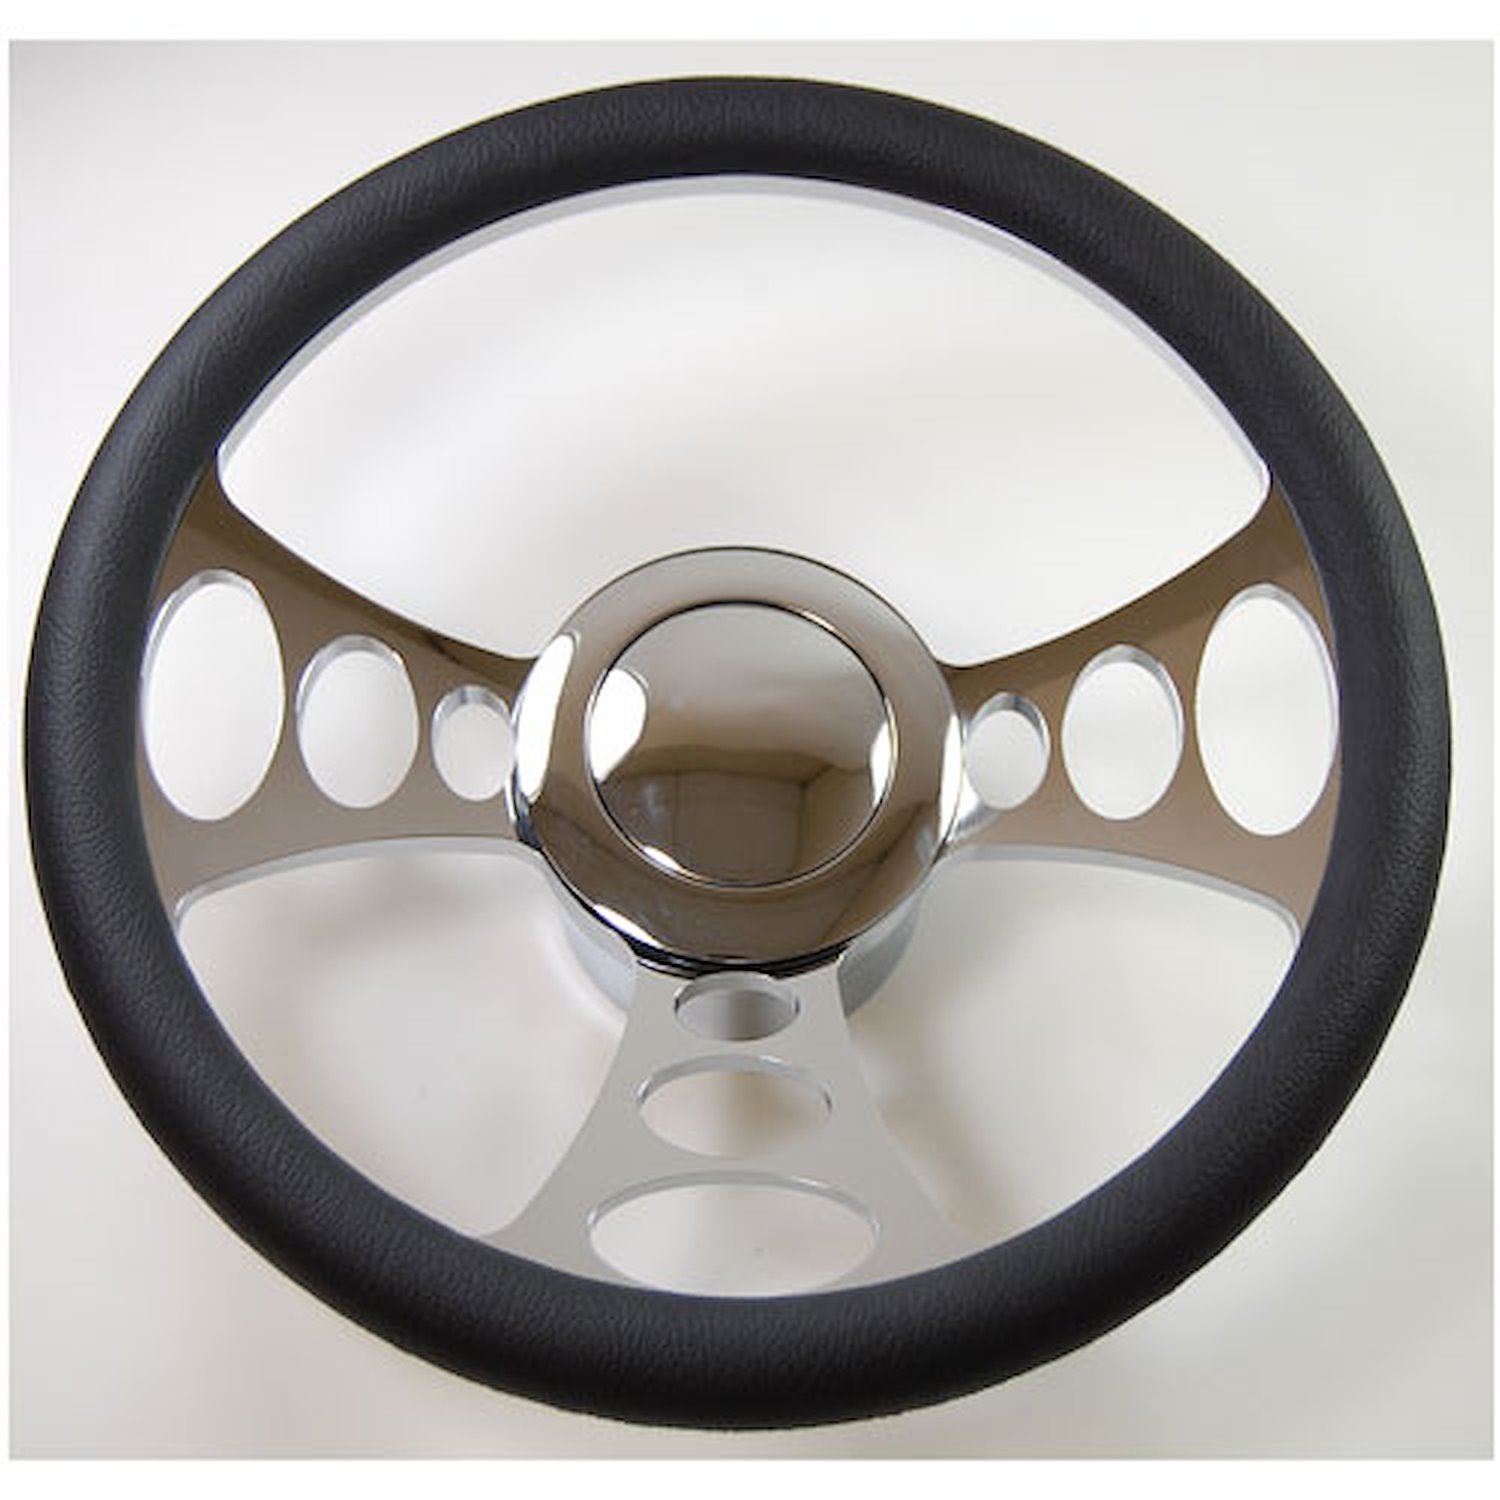 14 CHROME BILLET FLAMED STYLE STEERING WHEEL WITH LEATHER GRIP/HORN BUTTON/ADAPTOR KIT